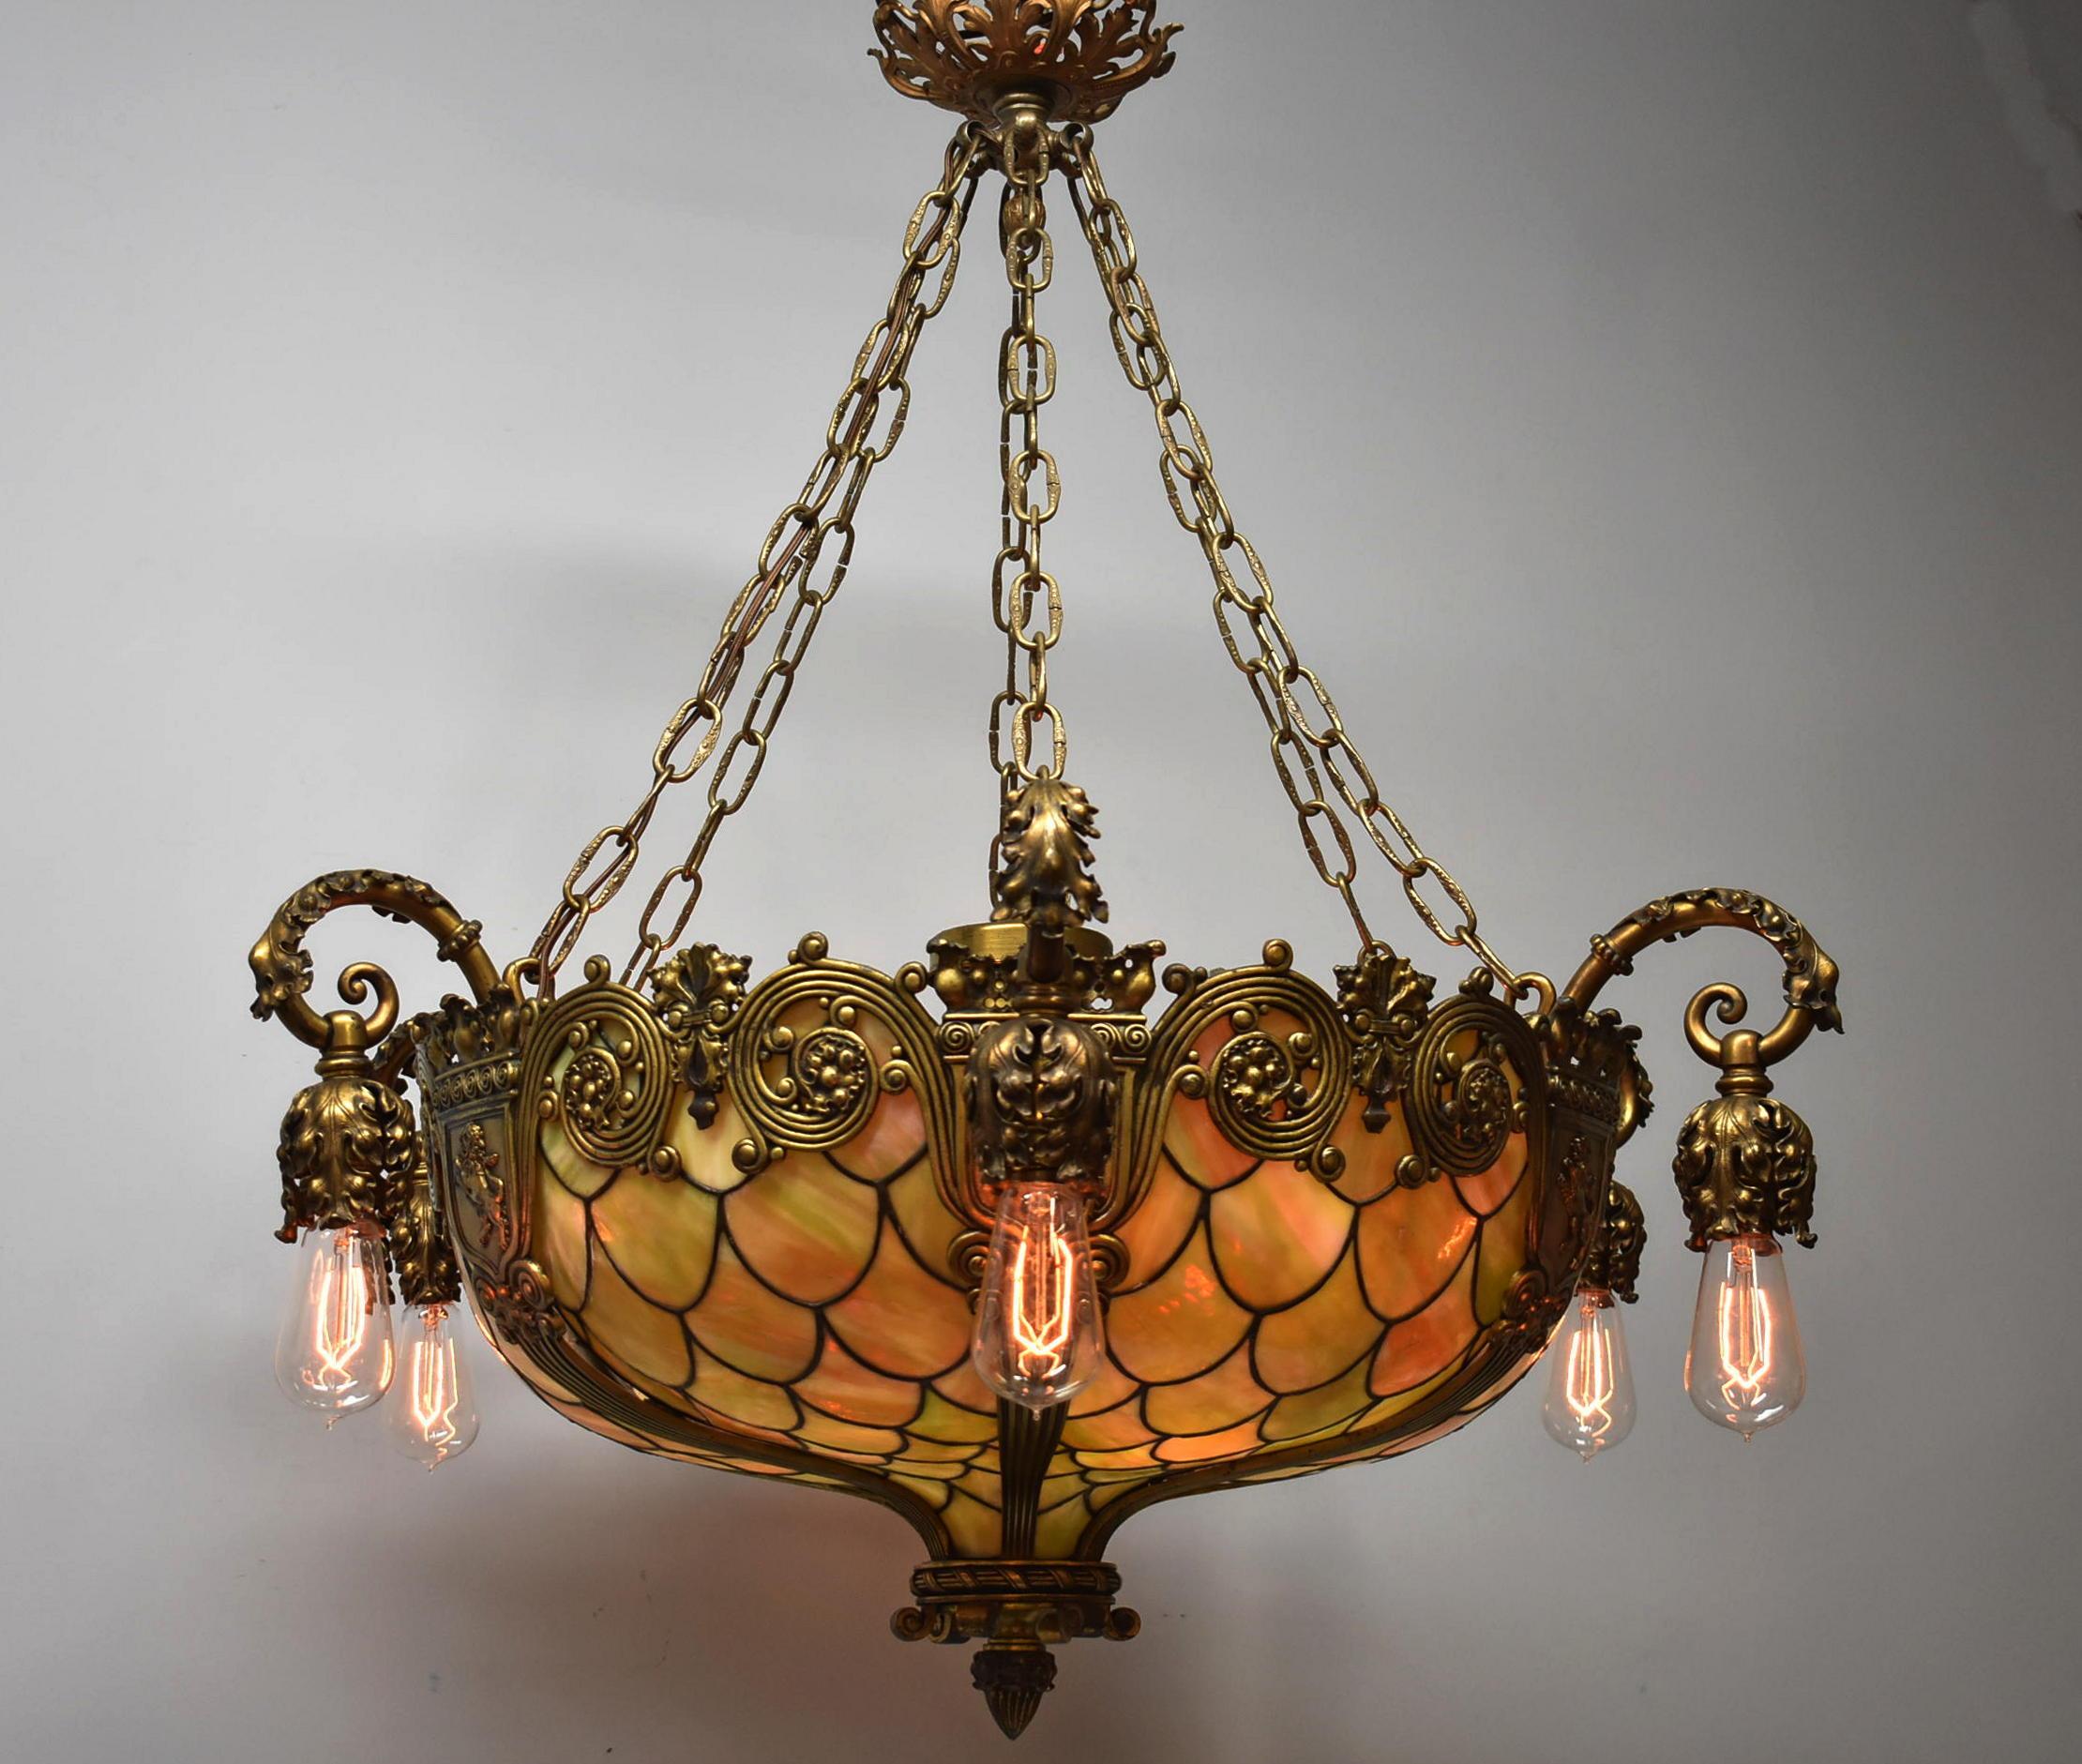 Antique bronze Gothic Revival fish scale leaded glass chandelier. Inverted bronze dome with bronze overlay. Six ribbed segmented frame with lion shield details around the top. Six original ornate exterior sockets and six original interior sockets.